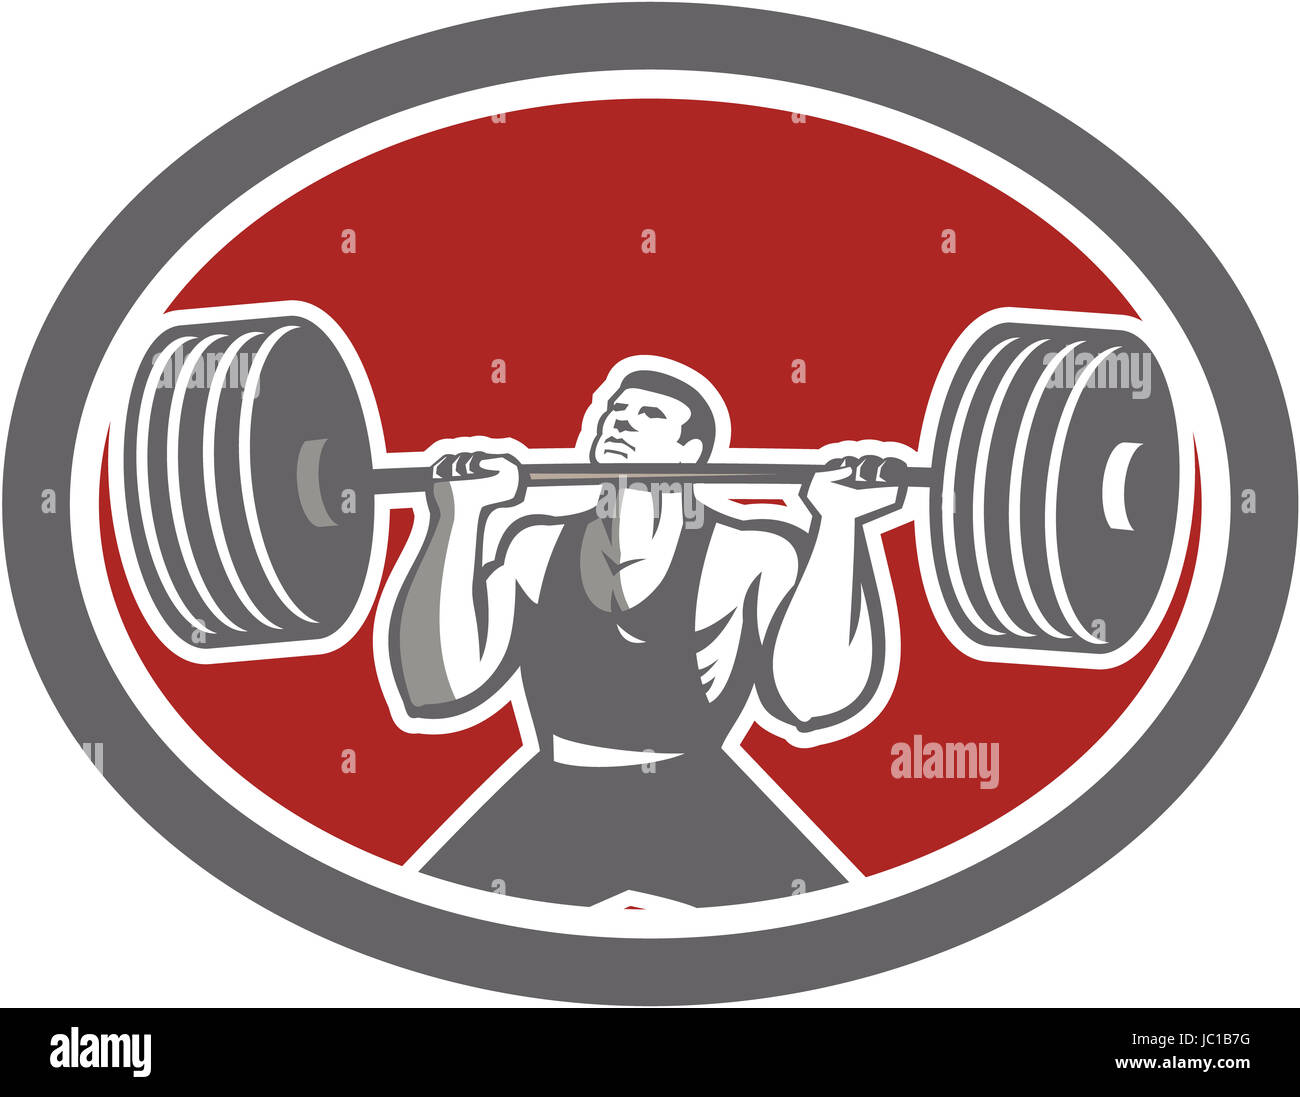 Illustration of a weightlifter lifting barbell set inside oval shape on isolated background viewed from front done in retro style. Stock Photo